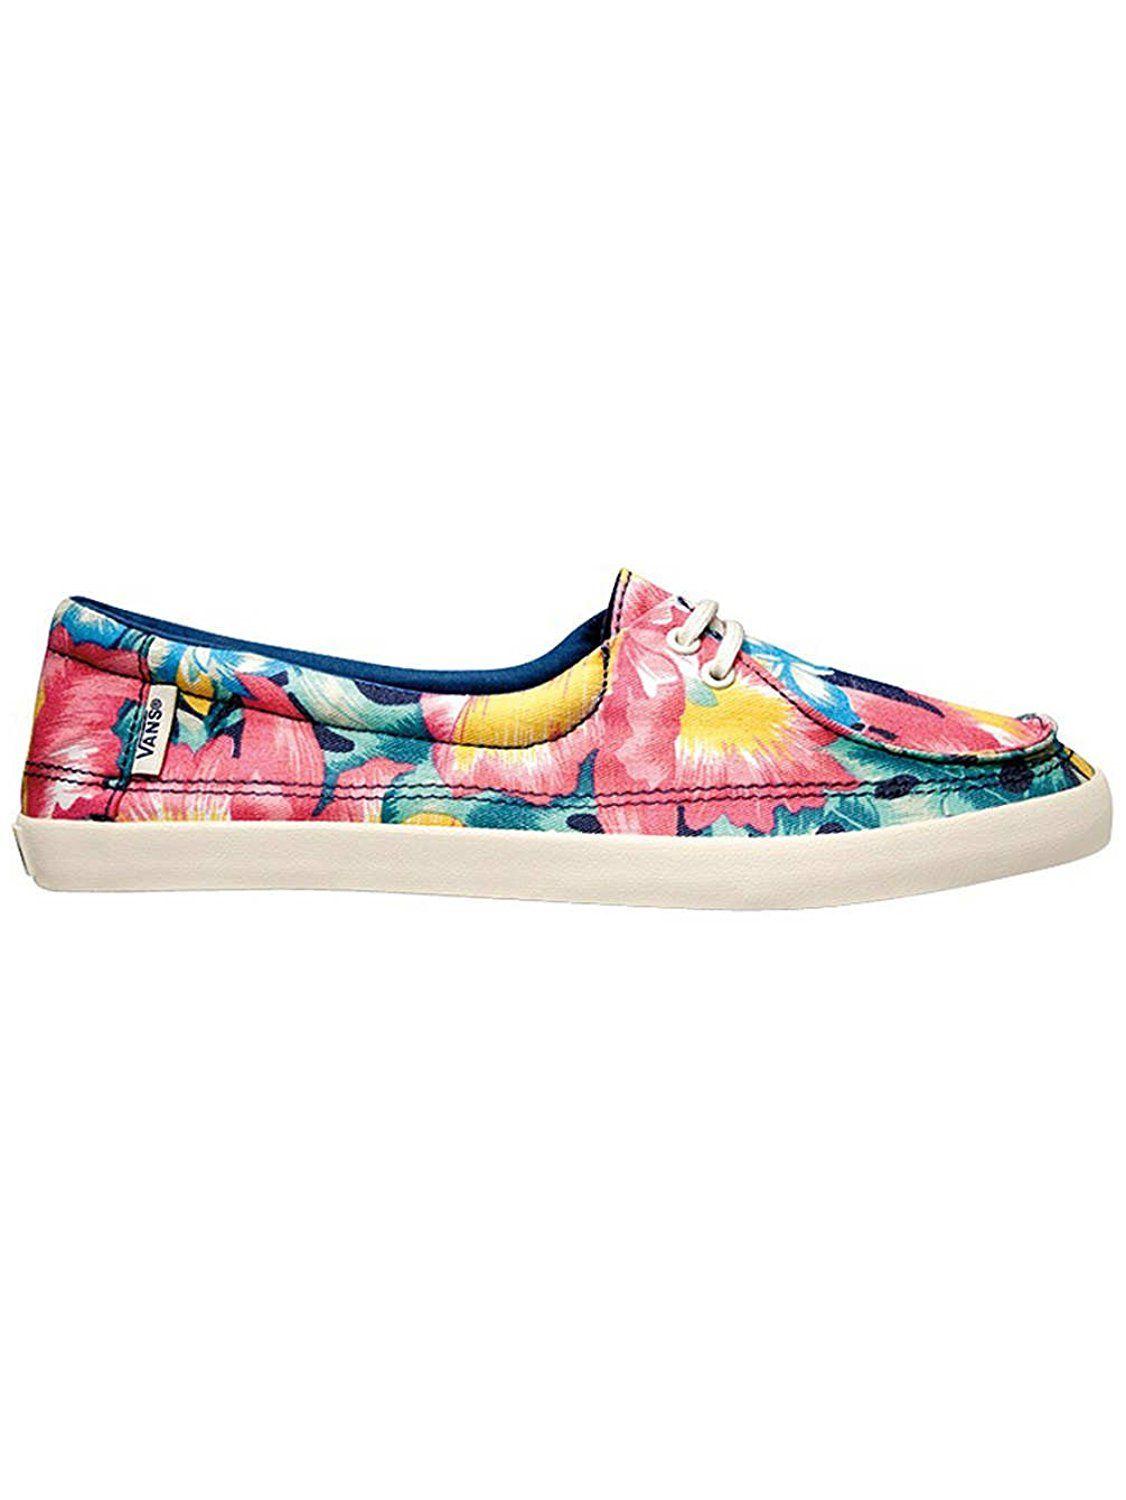 Vans Galaxy Logo - vans clothing store sydney, Yours clothing vans blue tropical floral